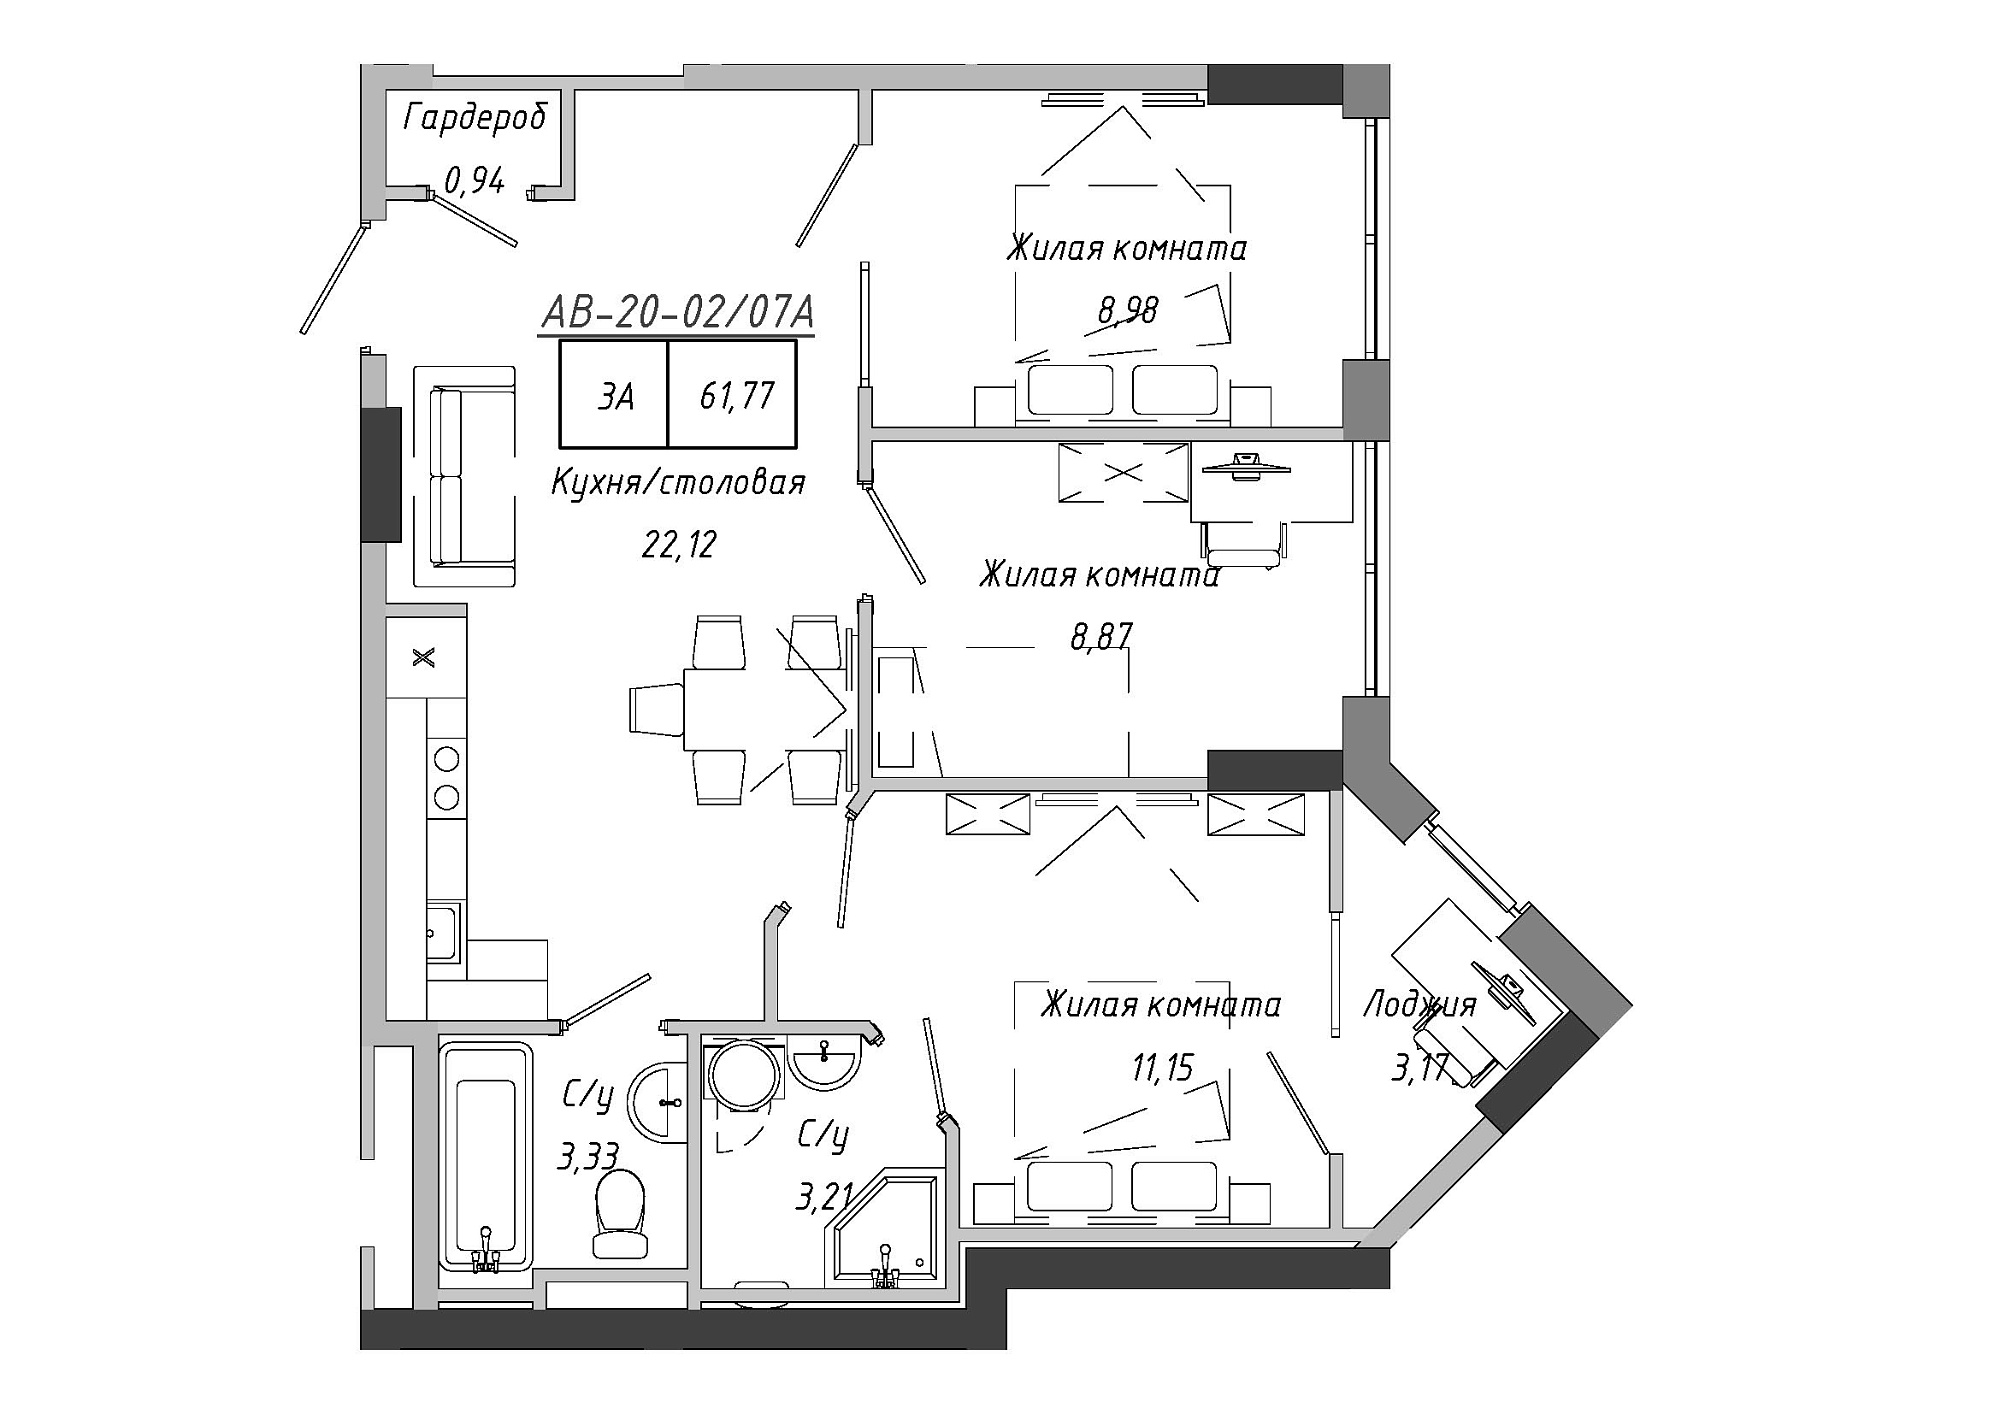 Planning 3-rm flats area 61.77m2, AB-20-02/0007а.